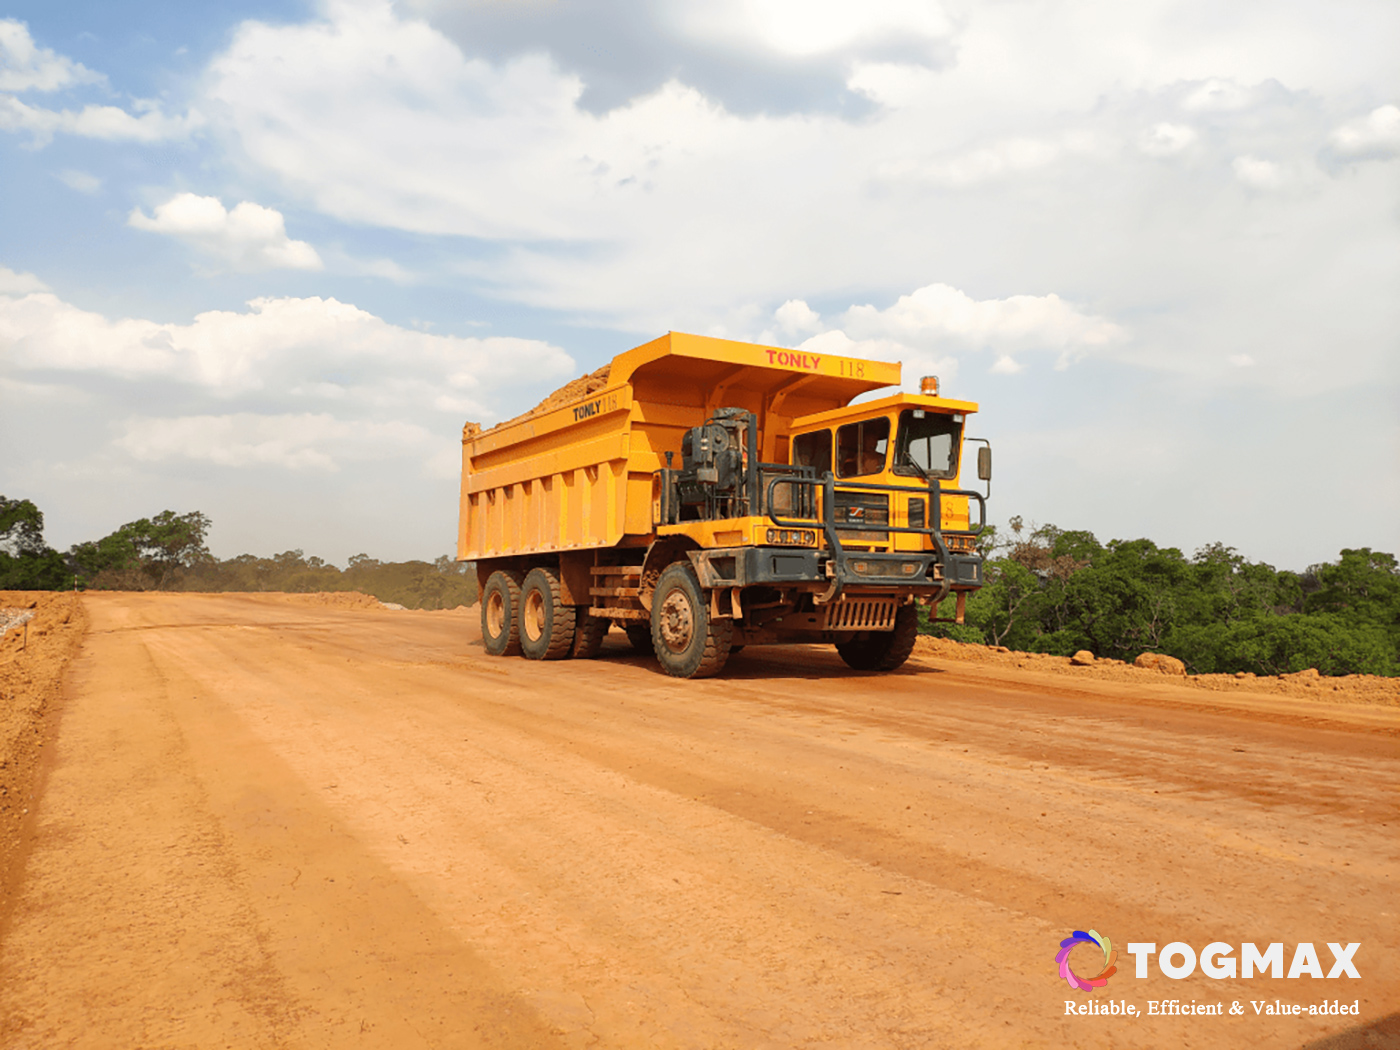 Tonly_TL875_Mining_Wide_Body_Dump_Trucks_in_DRCongo_Copper_Cobalt_Mines_TogMax_Group_Mining_Fleet_Solutions_Provider